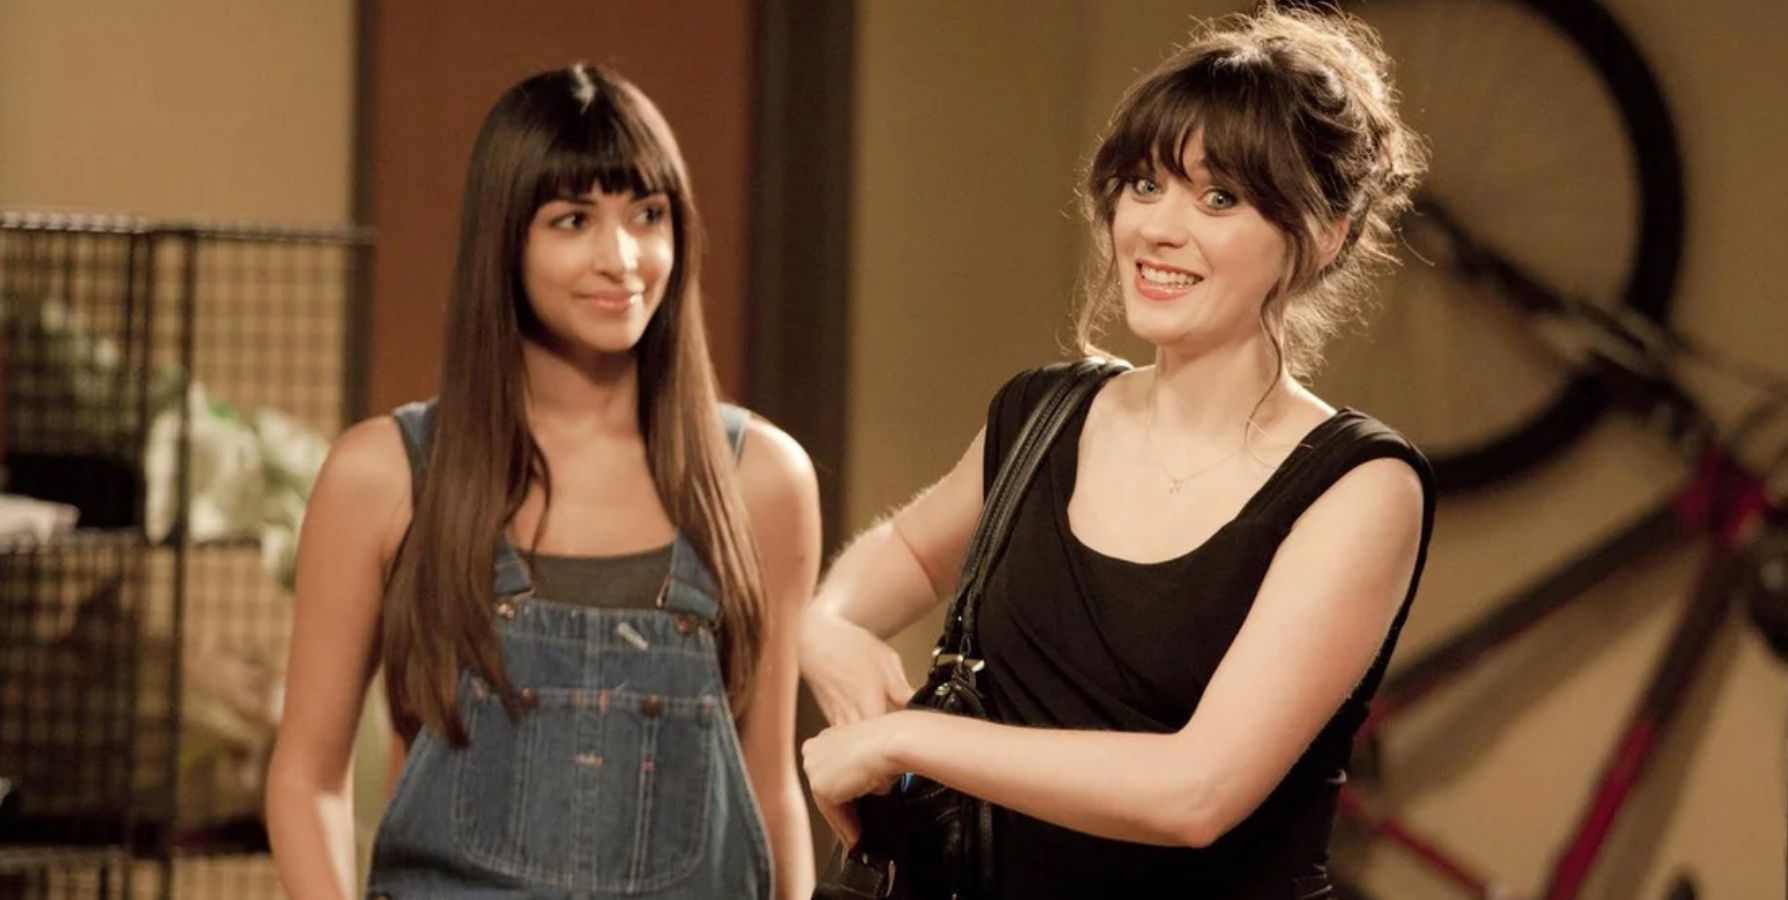 Cece wears overalls and Jess wears her little black dress in the New Girl pilot